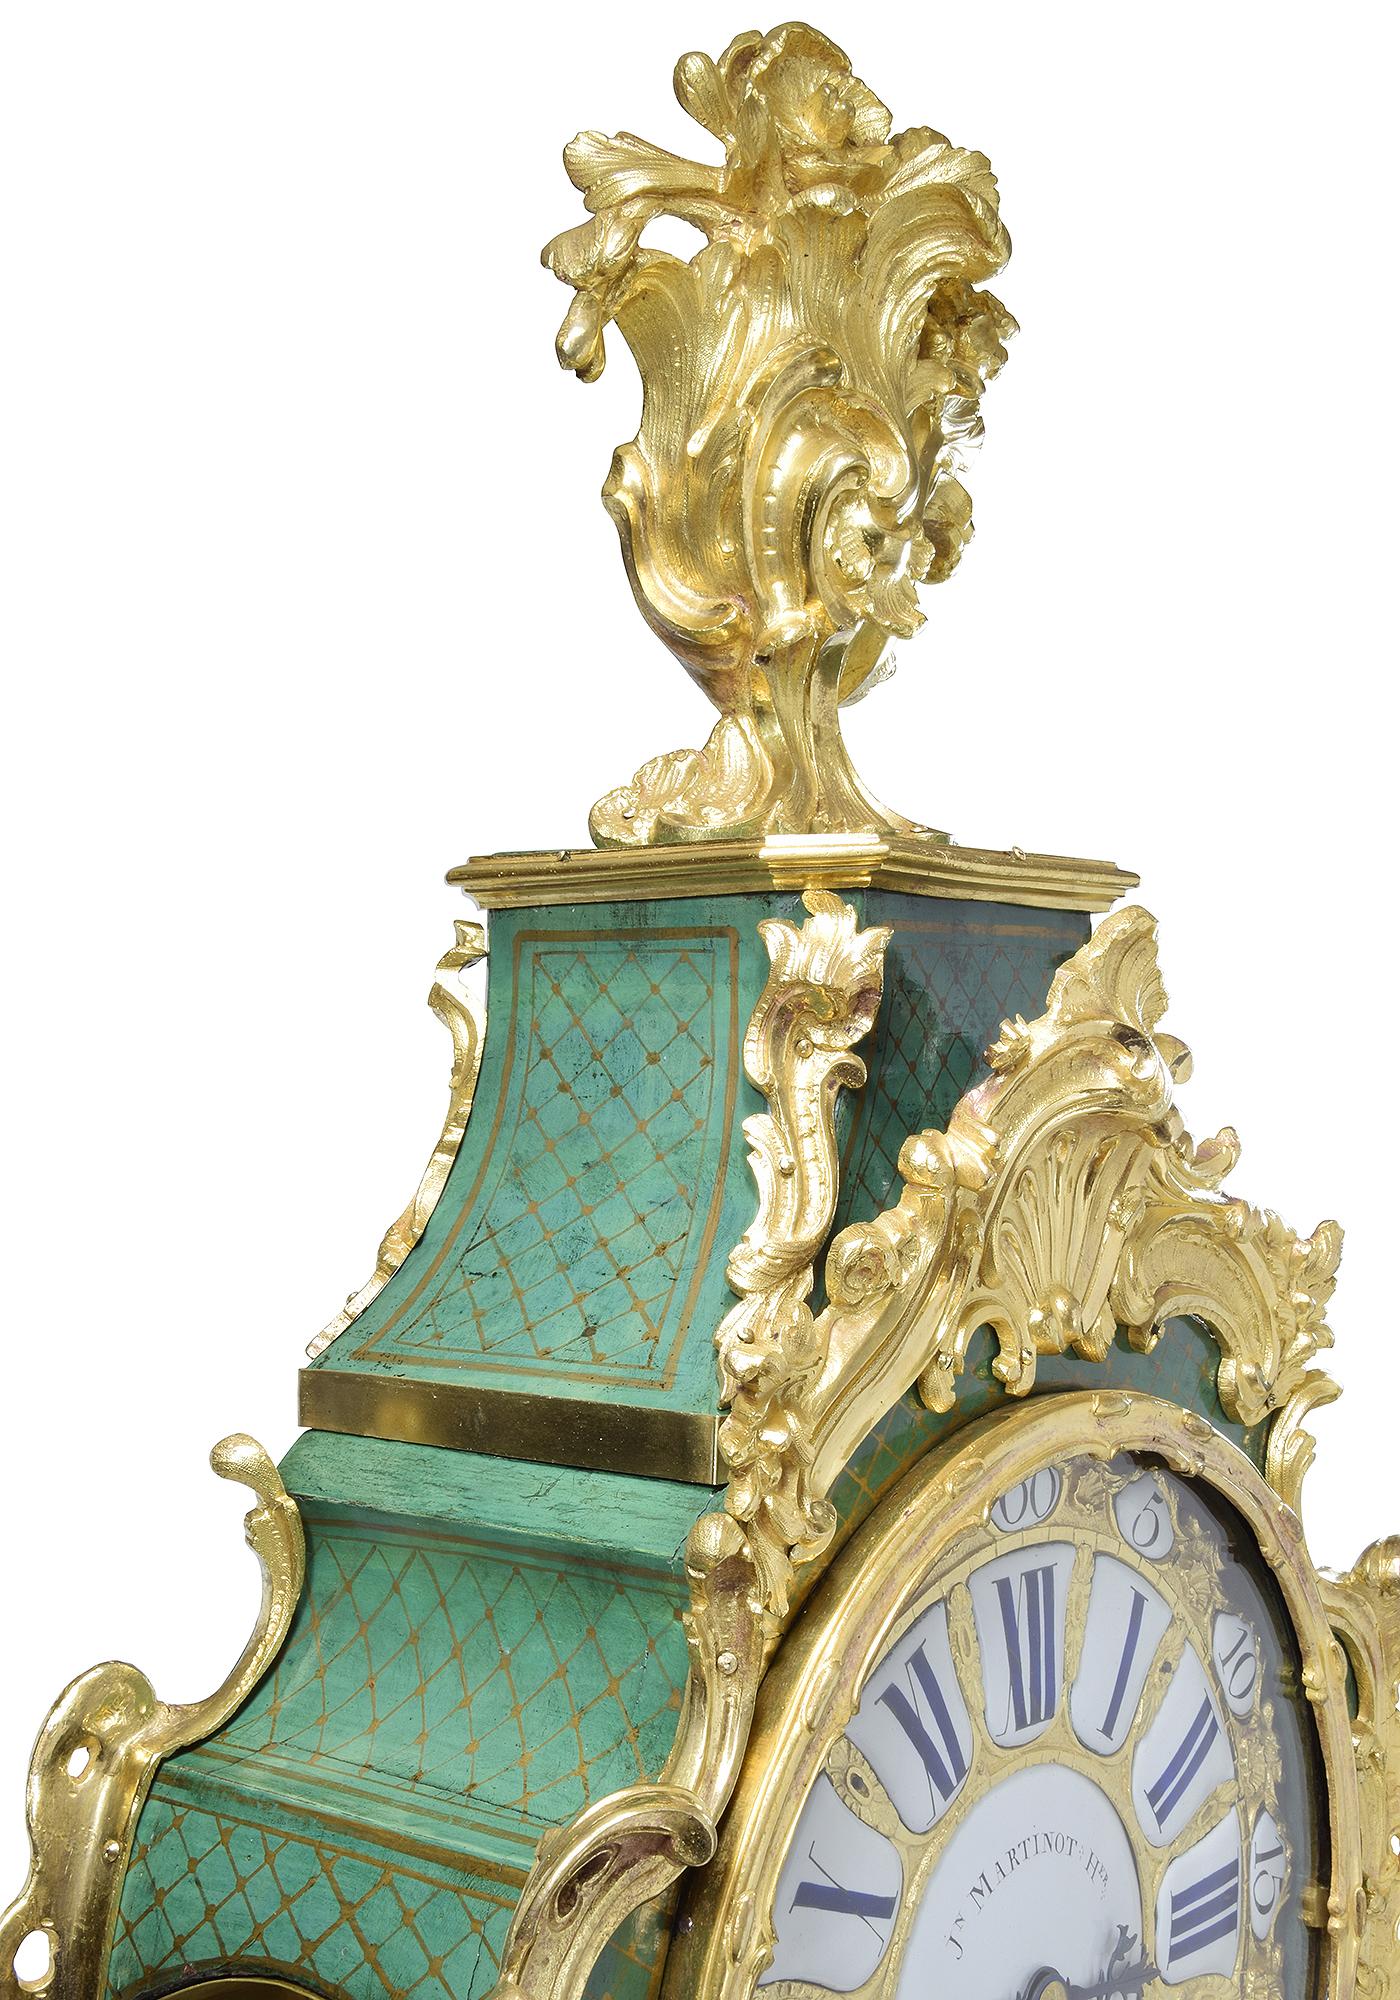 Splendid Louis XV period wall clock from the 18th century. Signed on the dial and the plate of the mechanism 